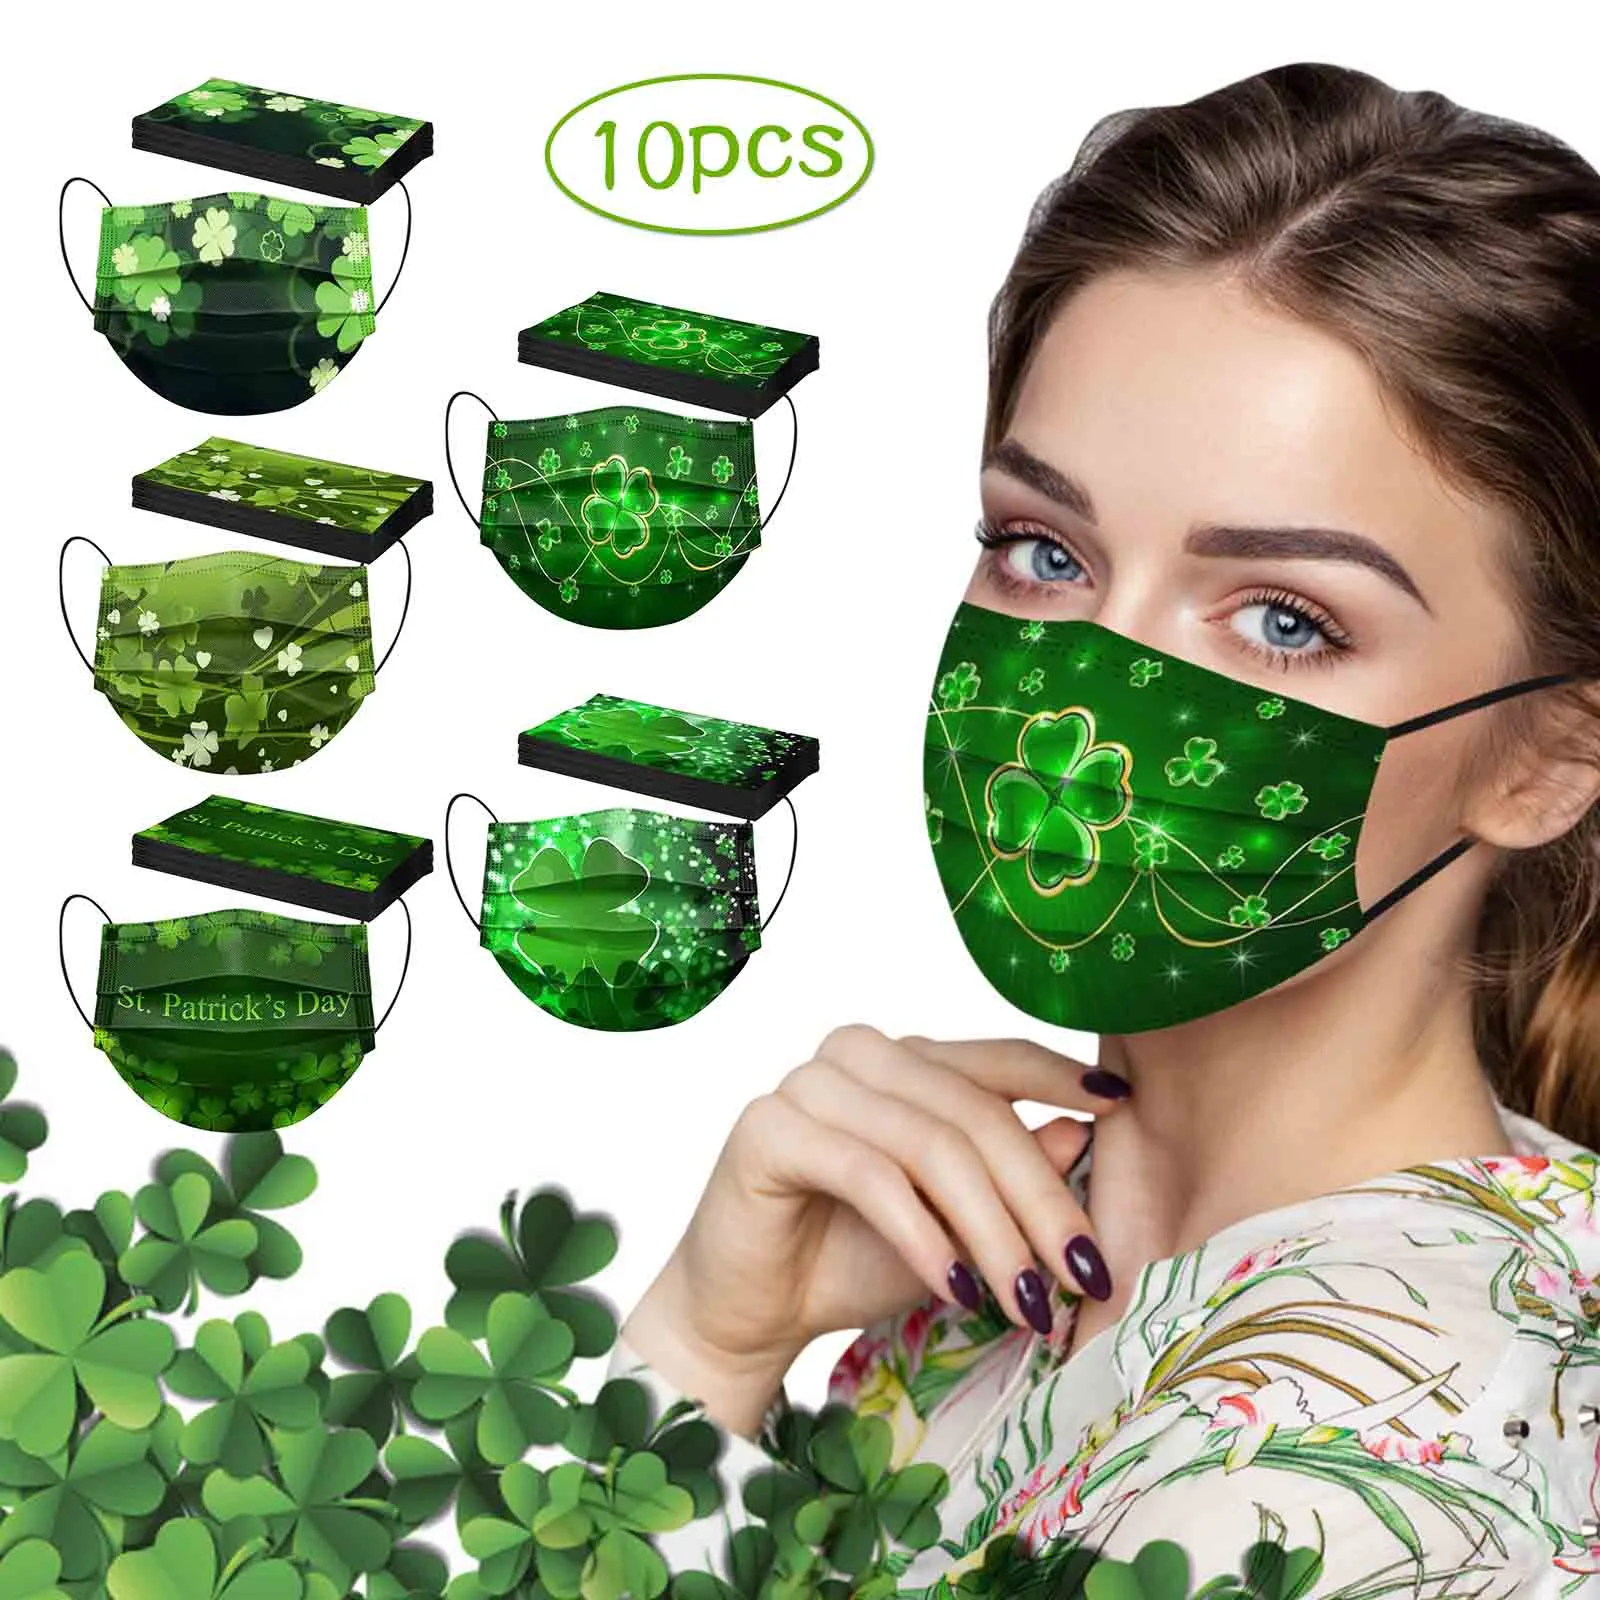 

10PC Fashion St. Patrick's Day Adult Mask Disposable Non Woven Unisex Face Mask 3Ply Ear Loop Ultrathin Outdoor Adults Masque